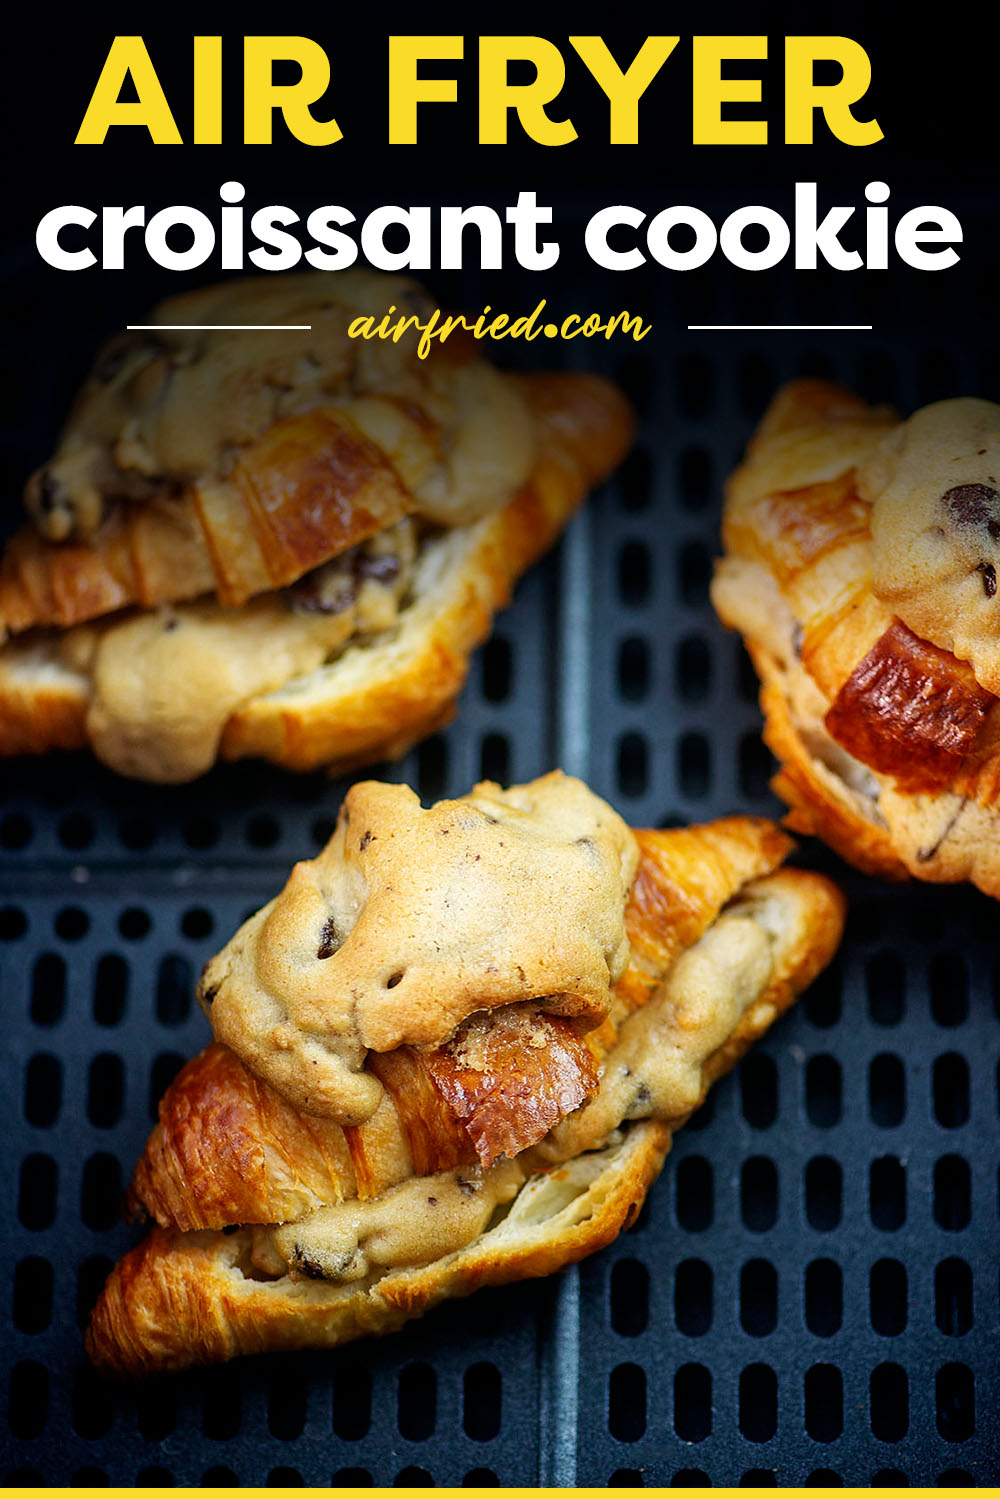 These Air Fryer Crookies, or croissant cookies, feature buttery croissants stuffed and topped with gooey, melty chocolate chip cookie dough! Just two ingredients and 3 minutes in the air fryer. These TikTok viral crookies are a must try! Straight from Paris - try Le Crookie yourself at home!These Air Fryer Crookies, or croissant cookies, feature buttery croissants stuffed and topped with gooey, melty chocolate chip cookie dough! Just two ingredients and 3 minutes in the air fryer. These TikTok viral crookies are a must try! Straight from Paris - try Le Crookie yourself at home!